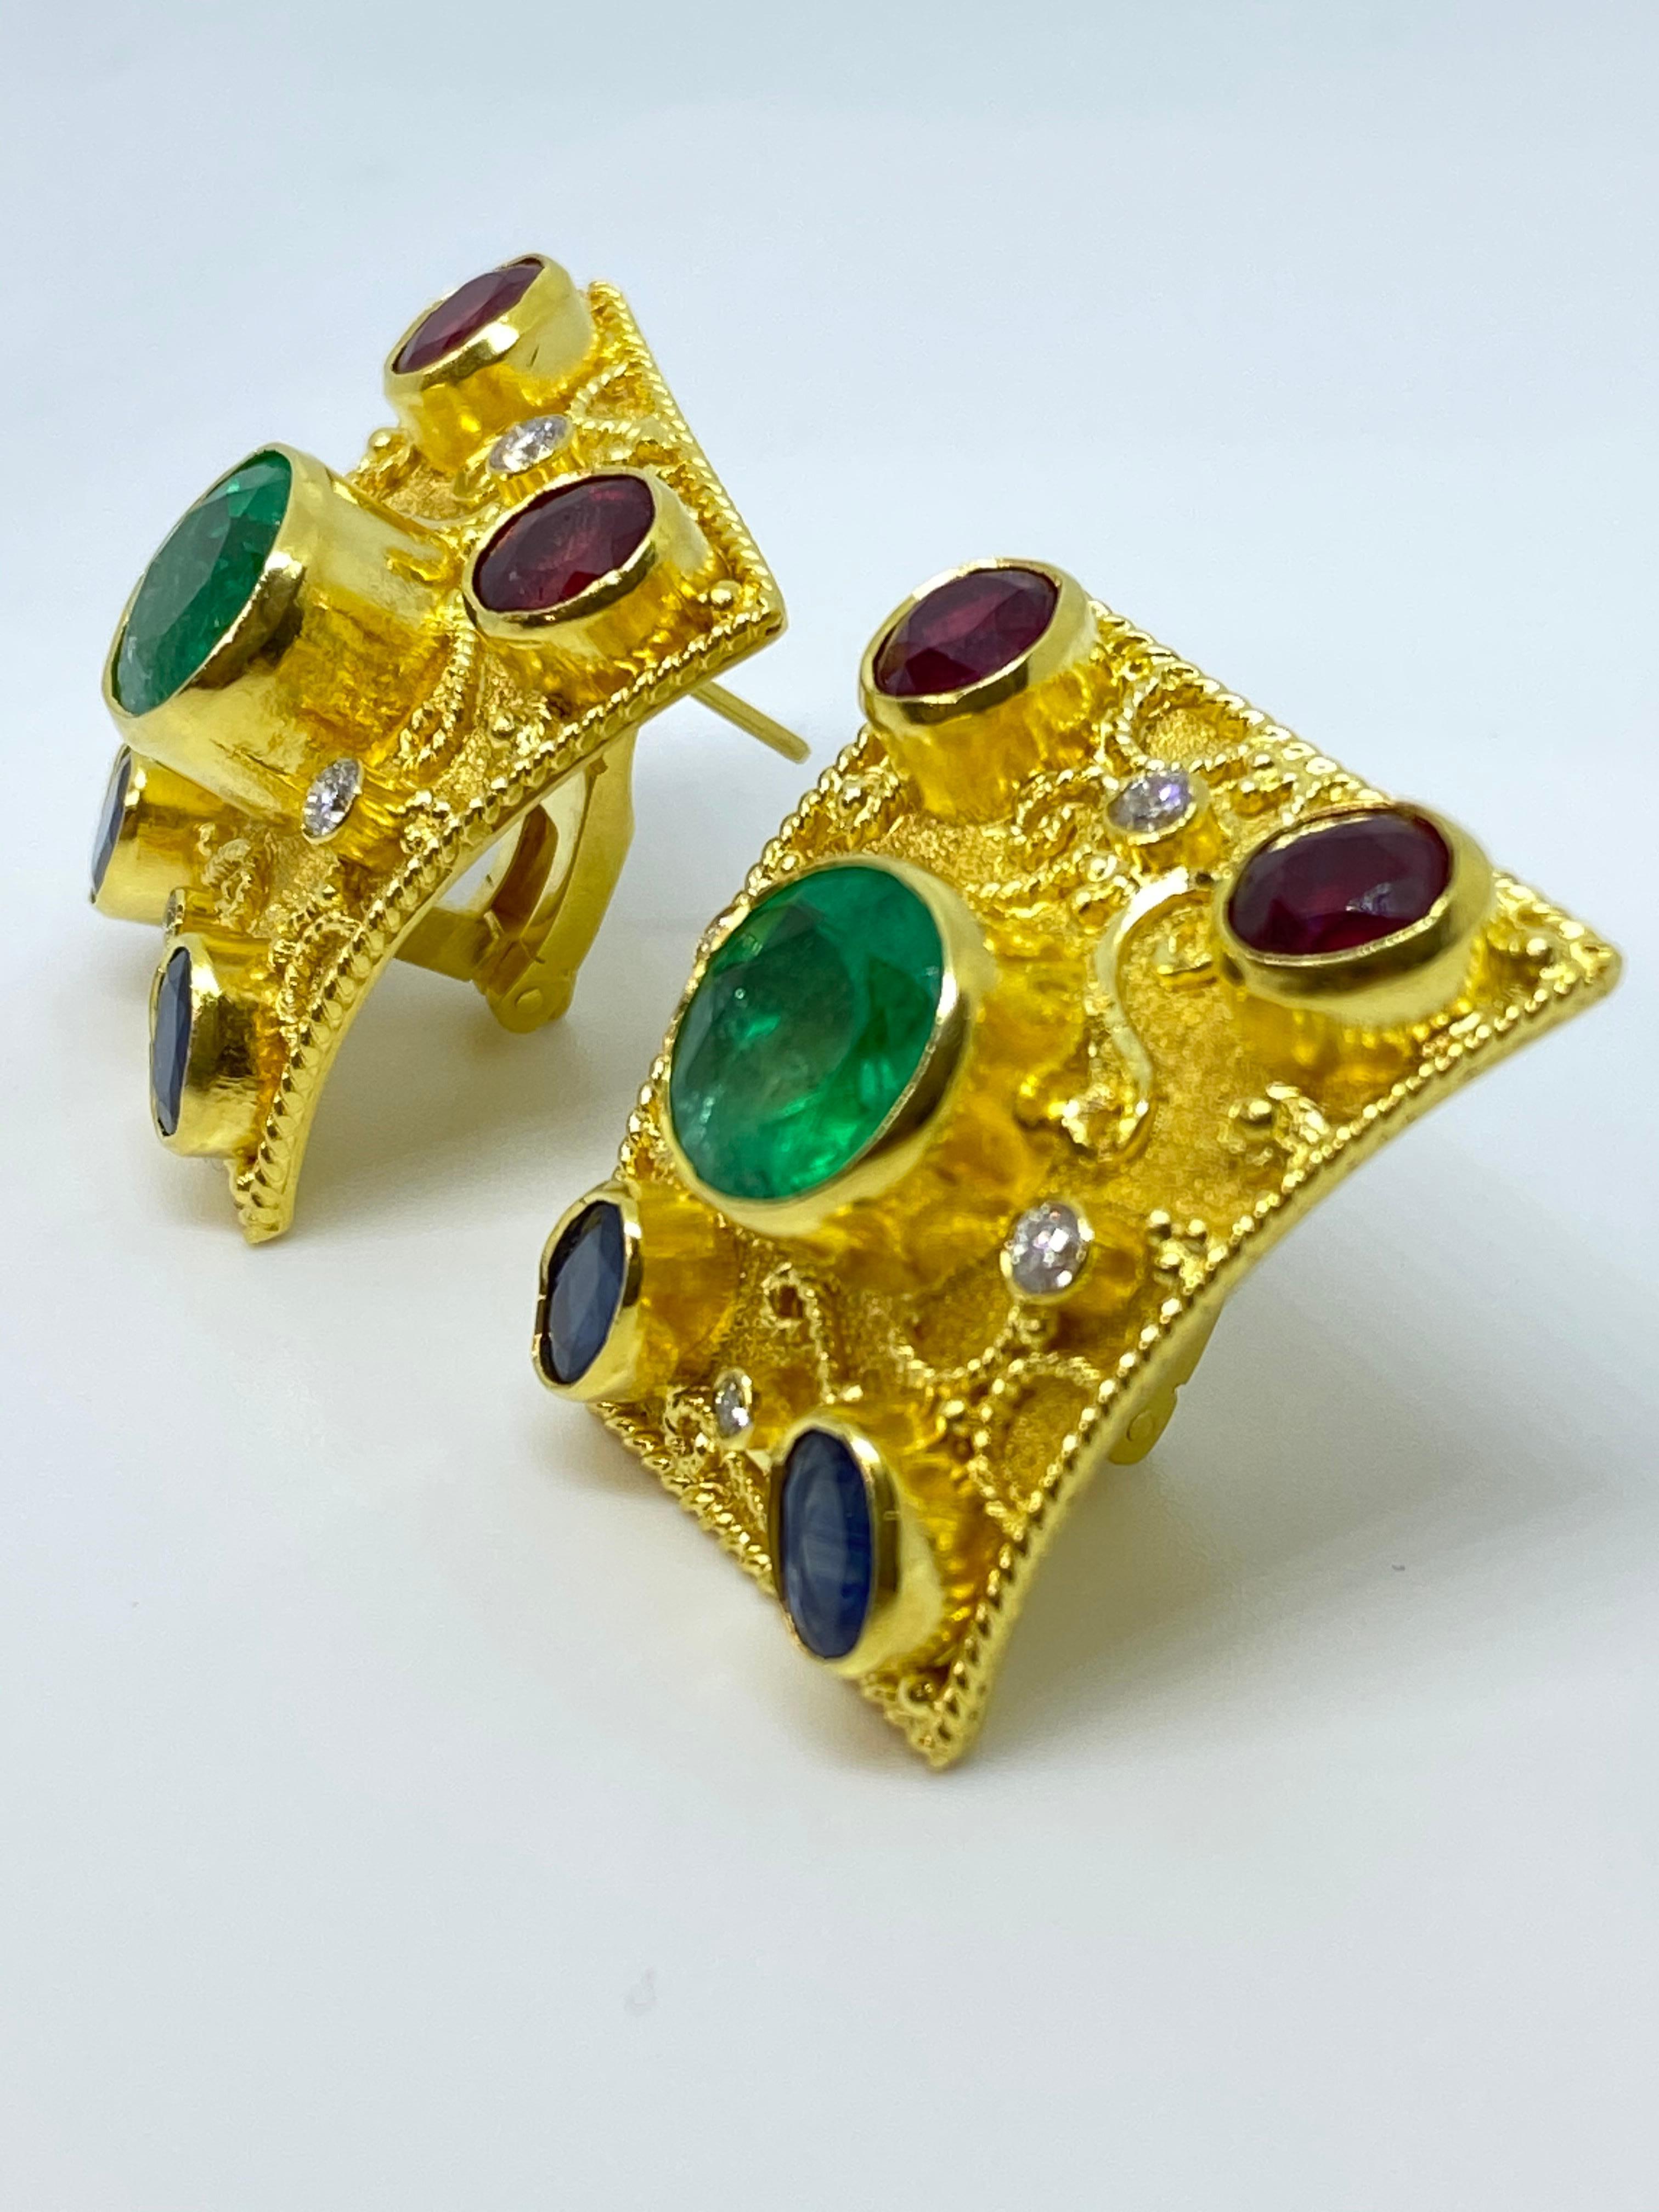 This S.Georgios designer one-of-a-kind pair of earrings are all hand made from 18 Karat Yellow Gold and are decorated with Byzantine-era style granulation workmanship done piece by piece microscopically. These beautiful curved earrings feature 2